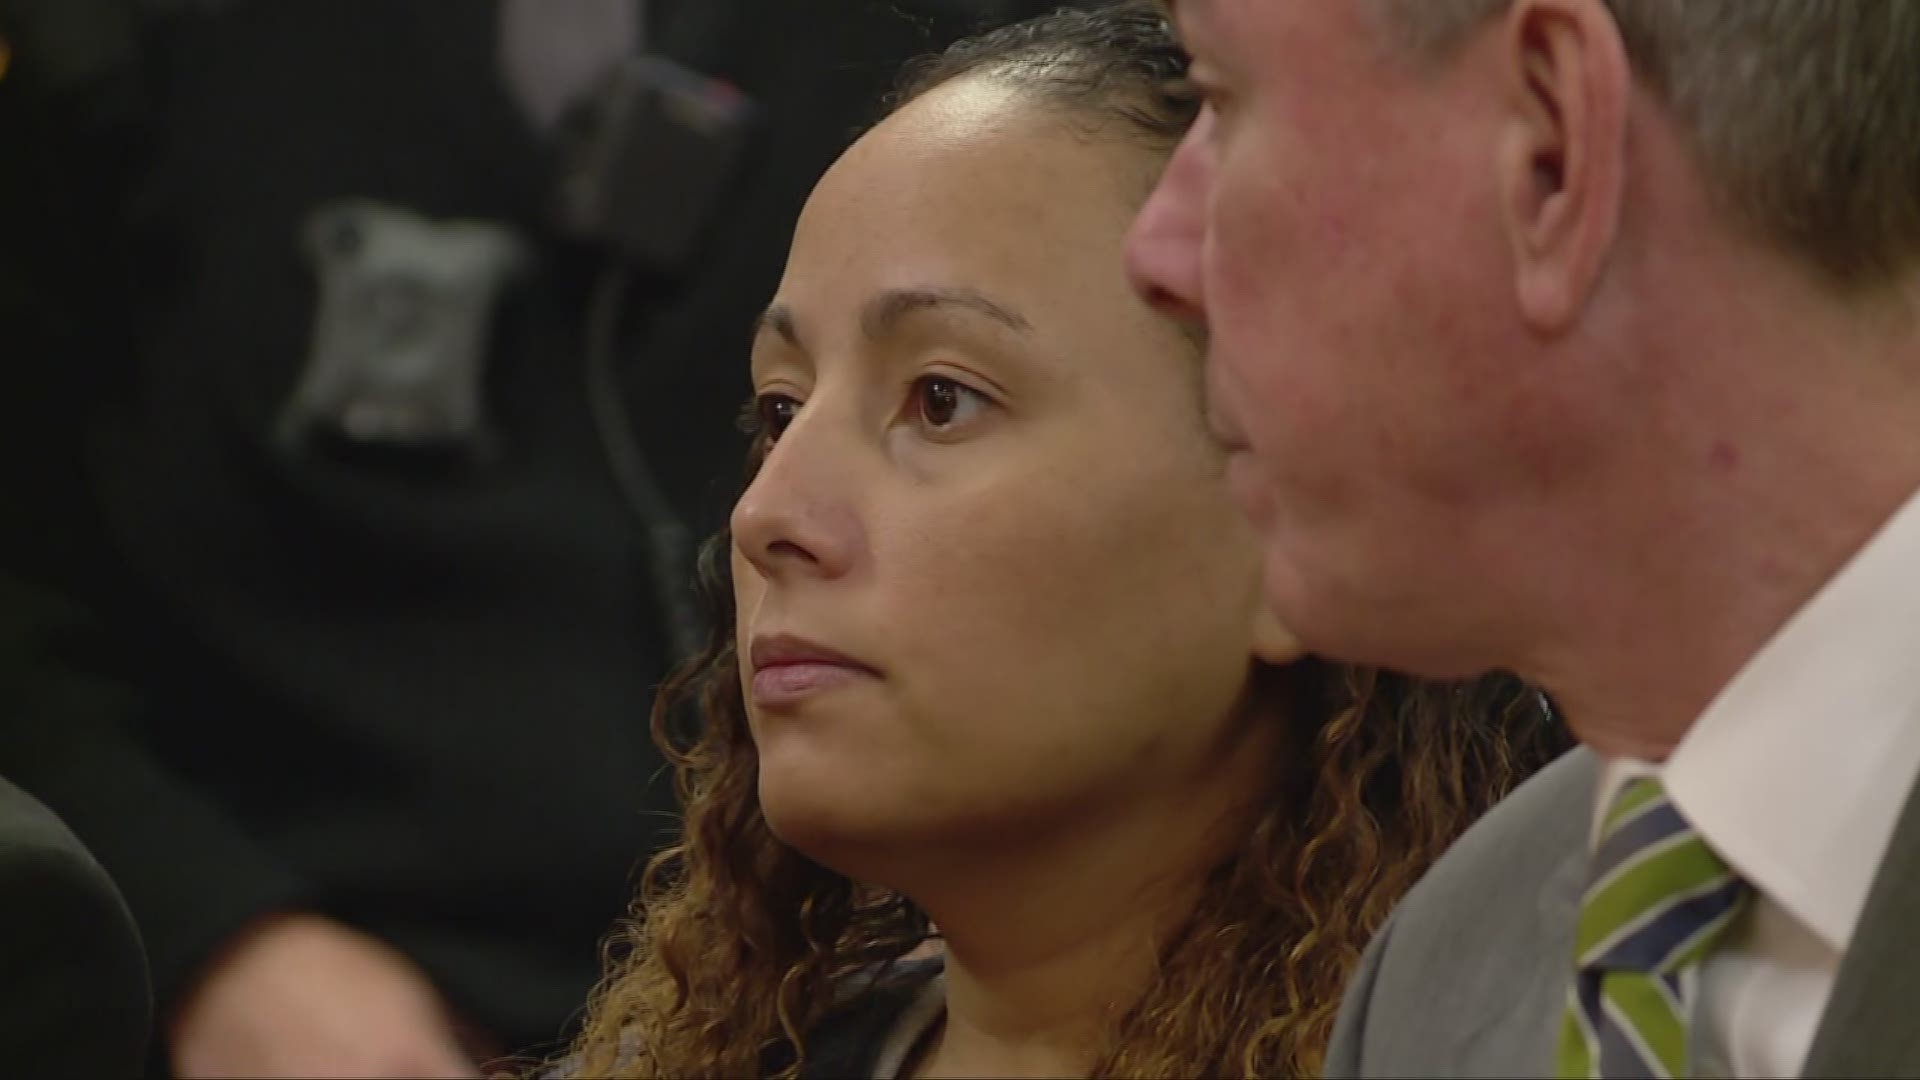 Larissa Rodriguez offered plea deal in food stamp fraud case